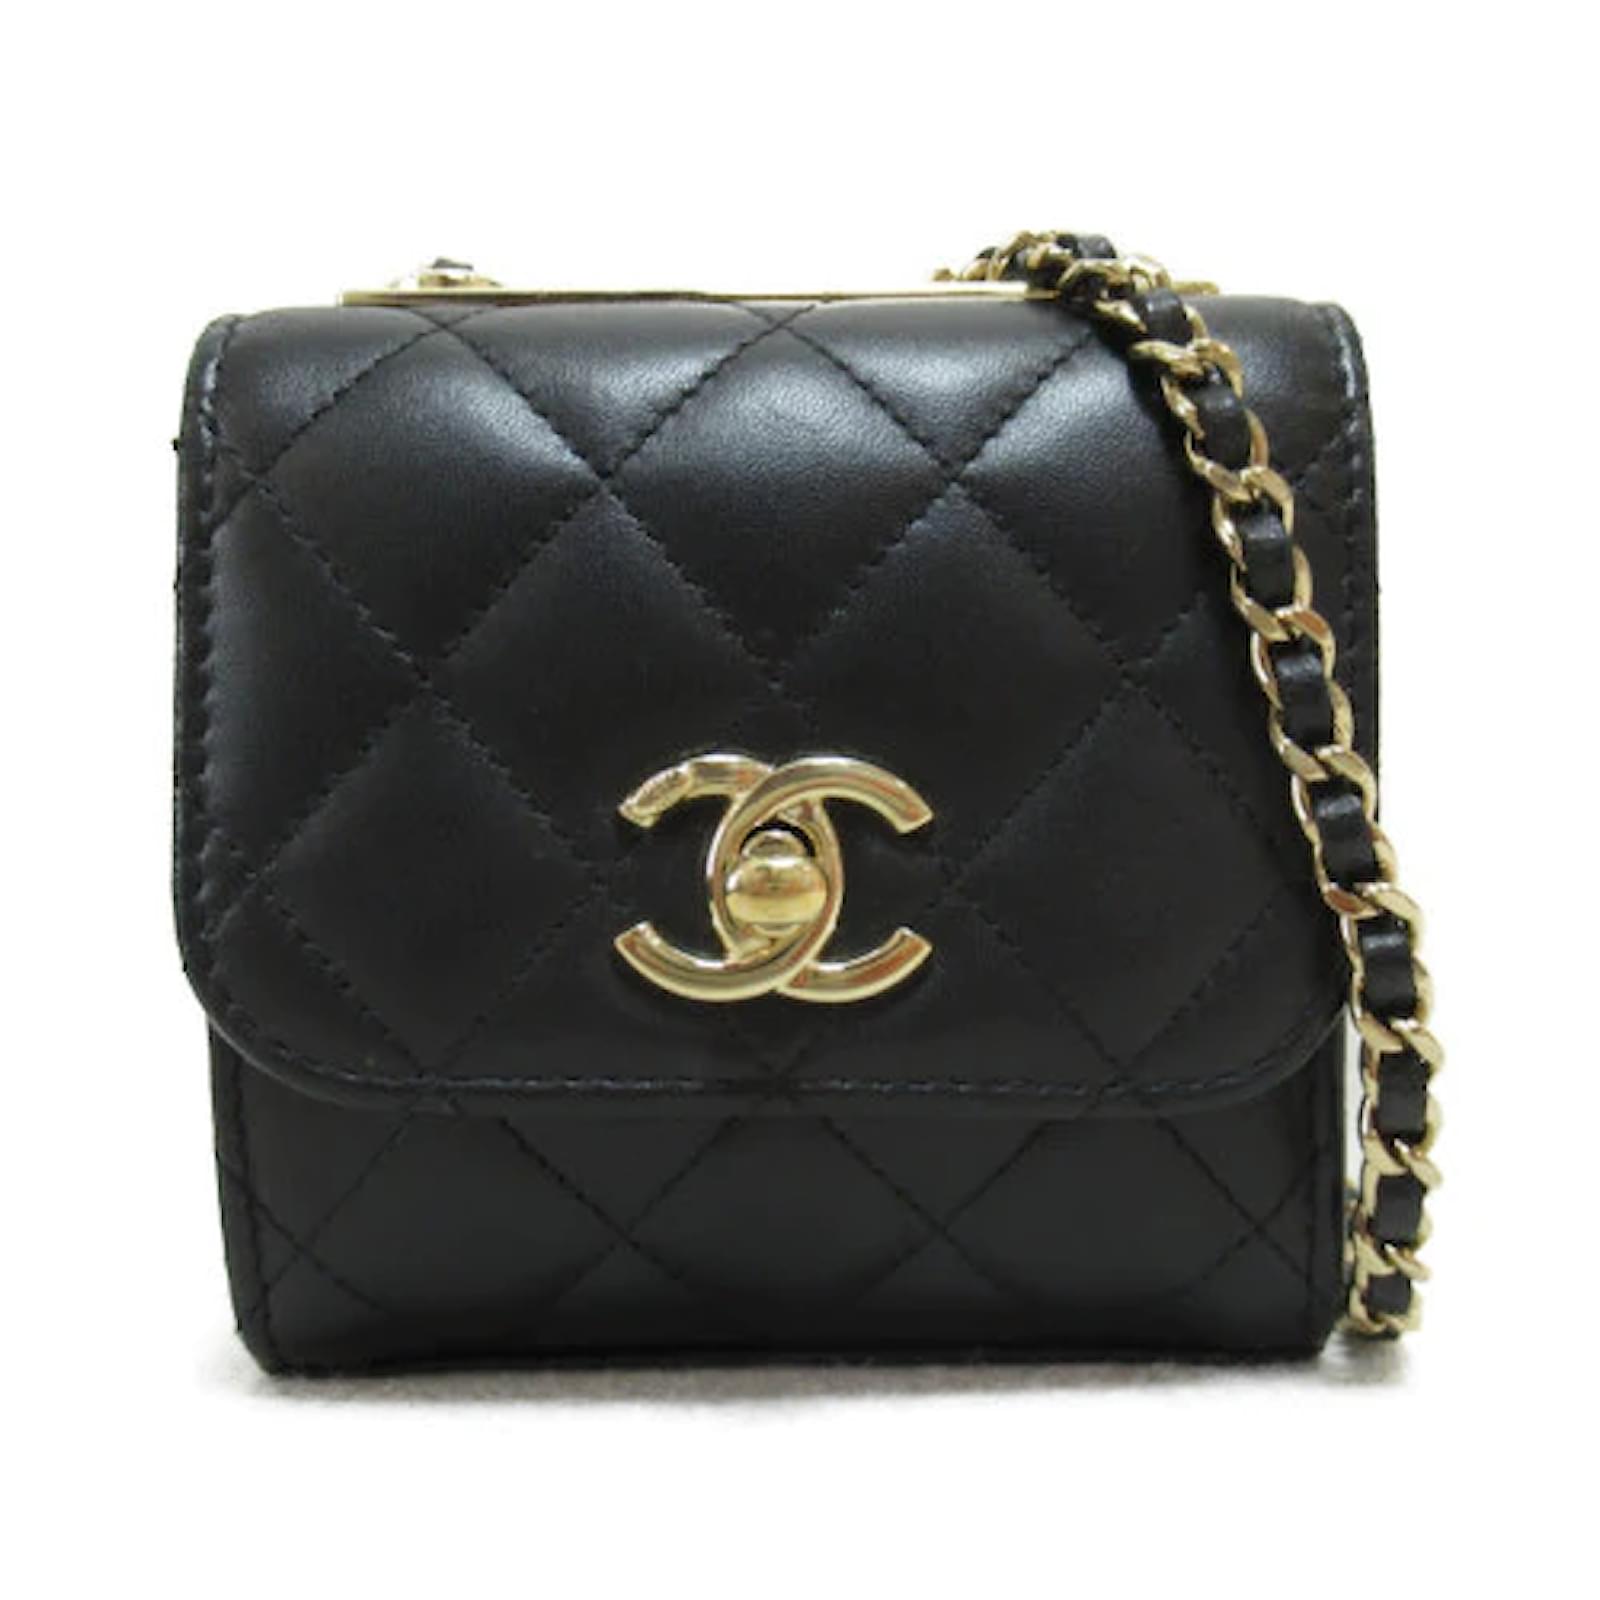 Trendy cc wallet on chain leather crossbody bag Chanel Black in